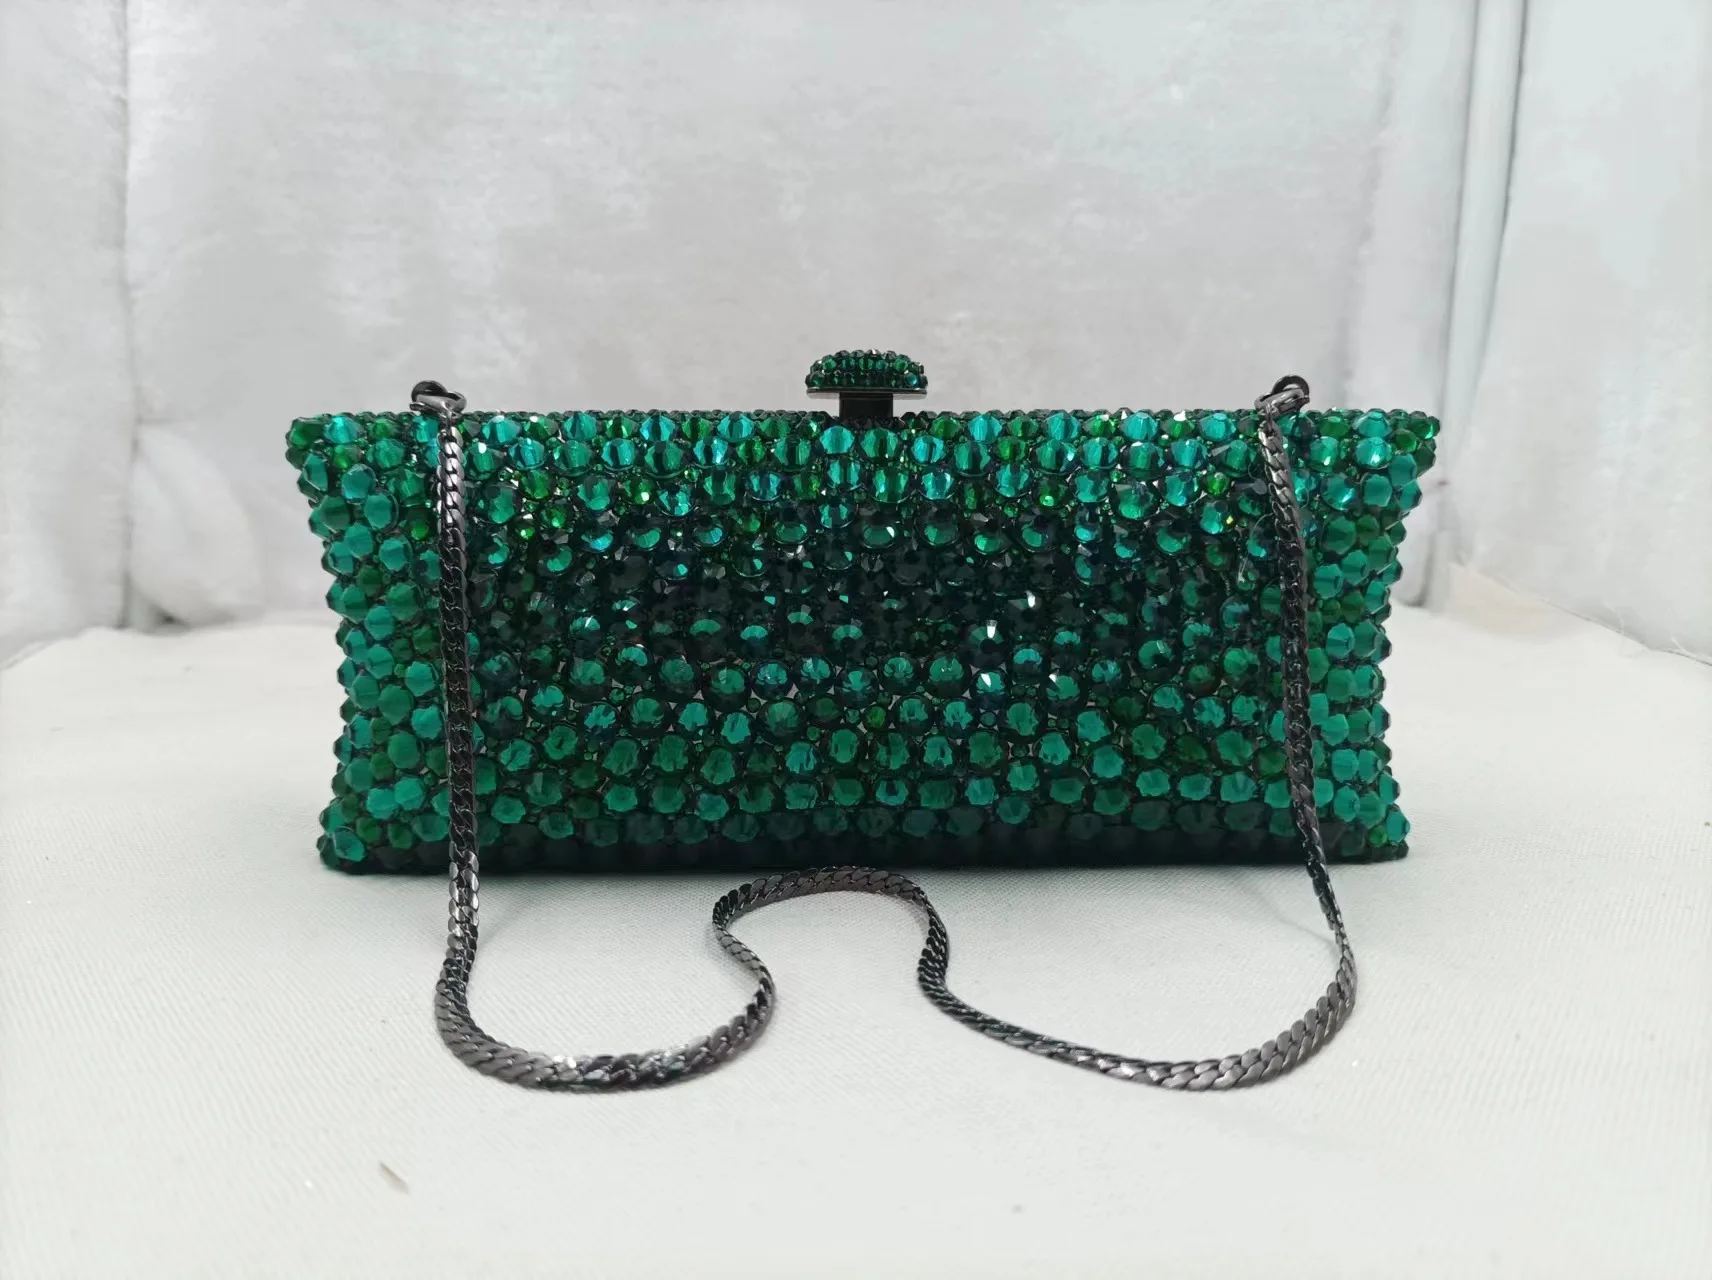 Evening Party Bags for Women Sparkly Clutch Purse Wedding Purses